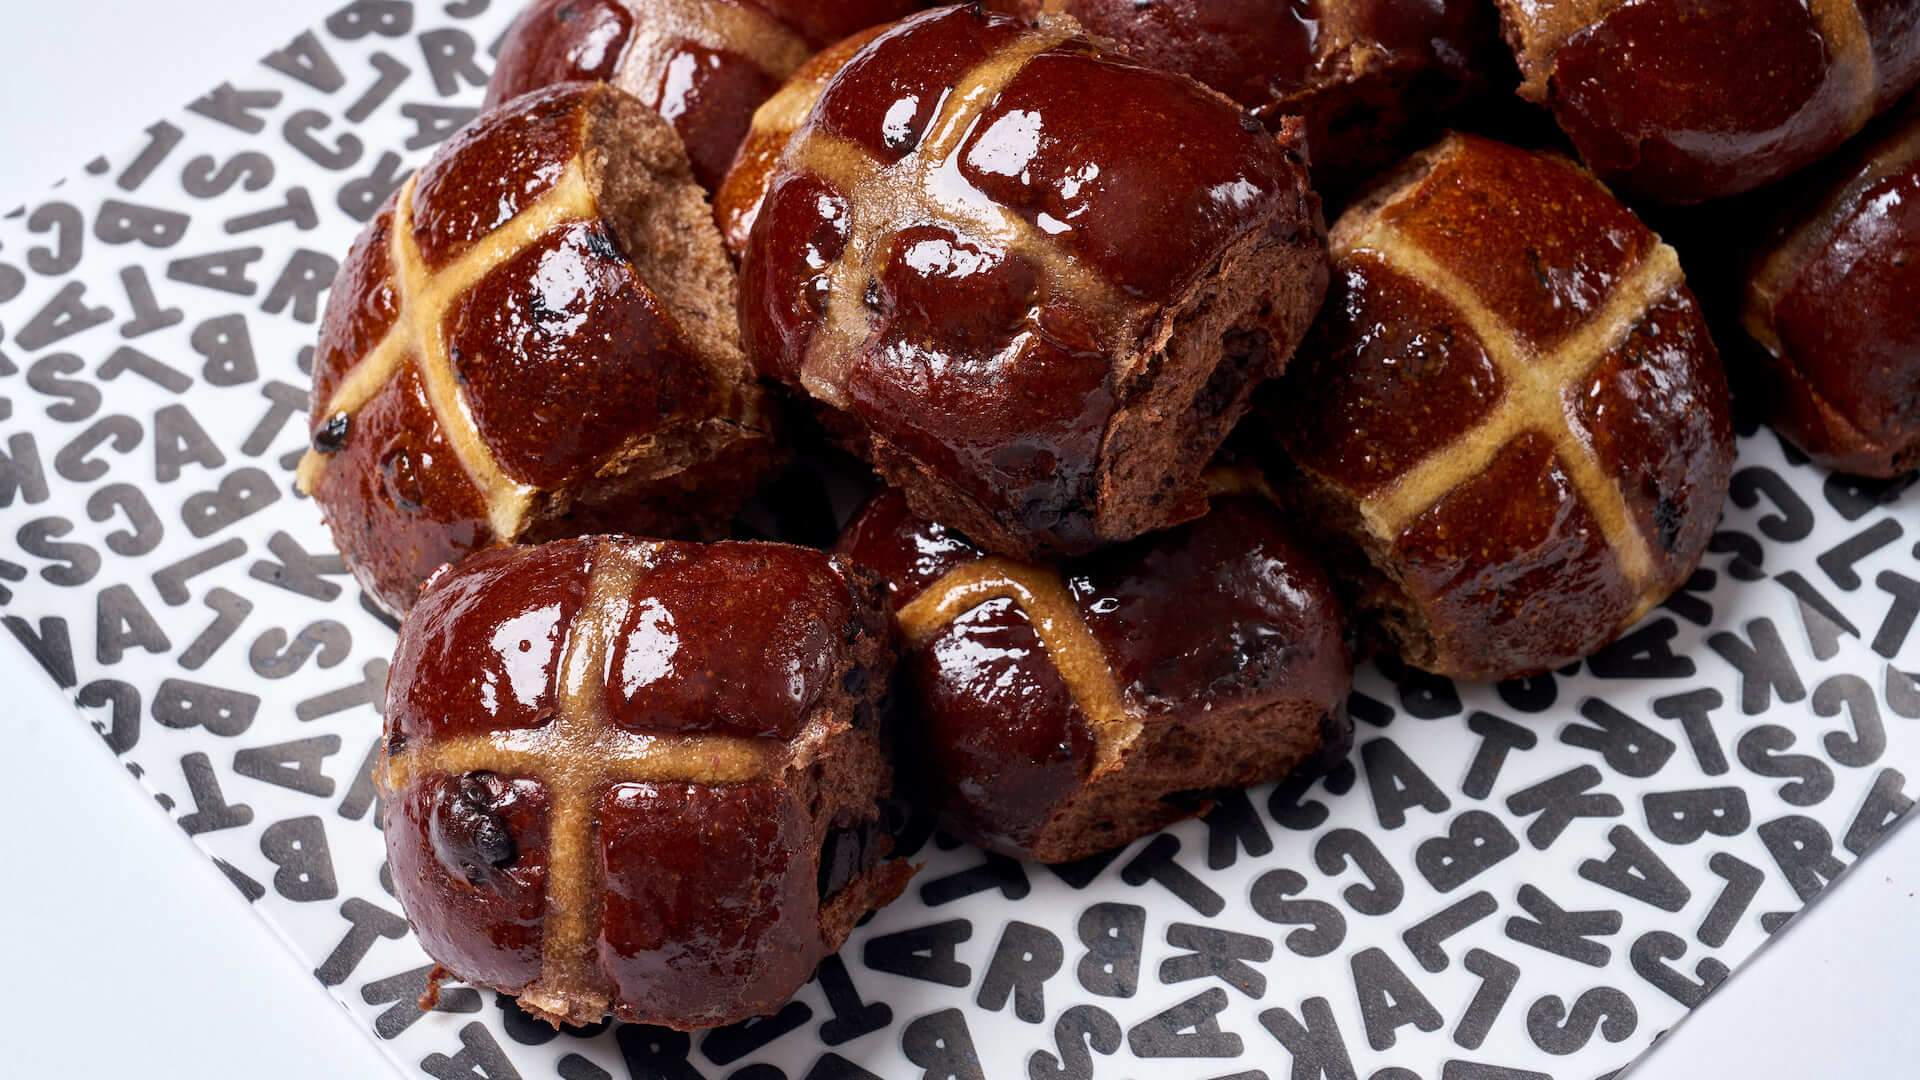 Easter Hot Cross Buns from Black Star Pastry and Koko Black